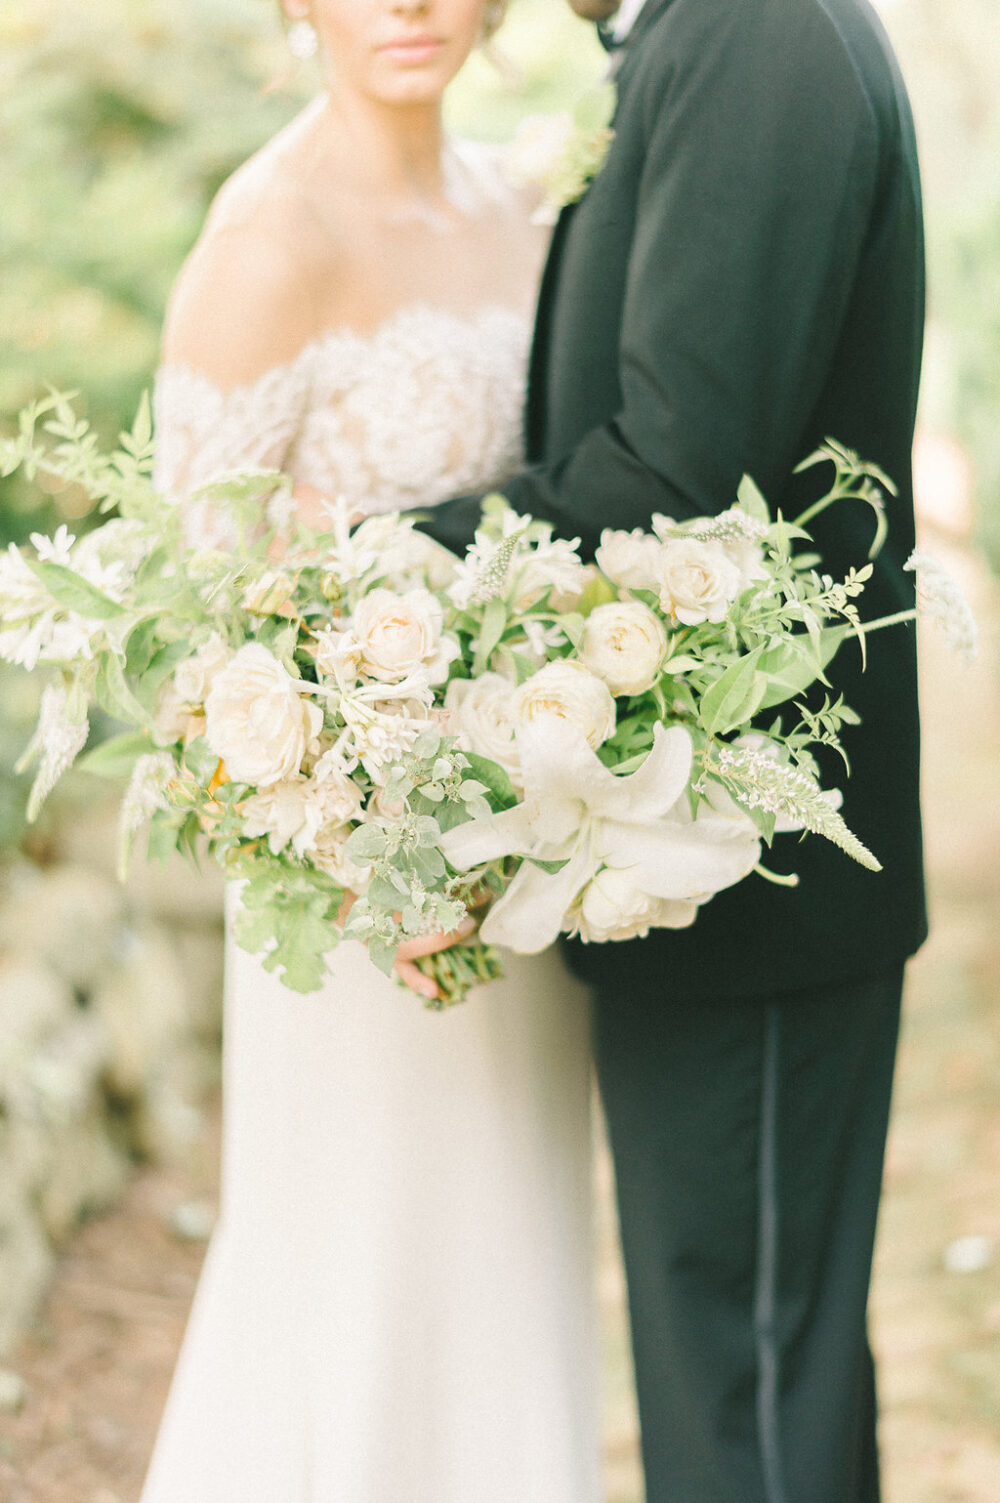 How to Throw an Eco-Friendly Wedding - IMPACT Collective